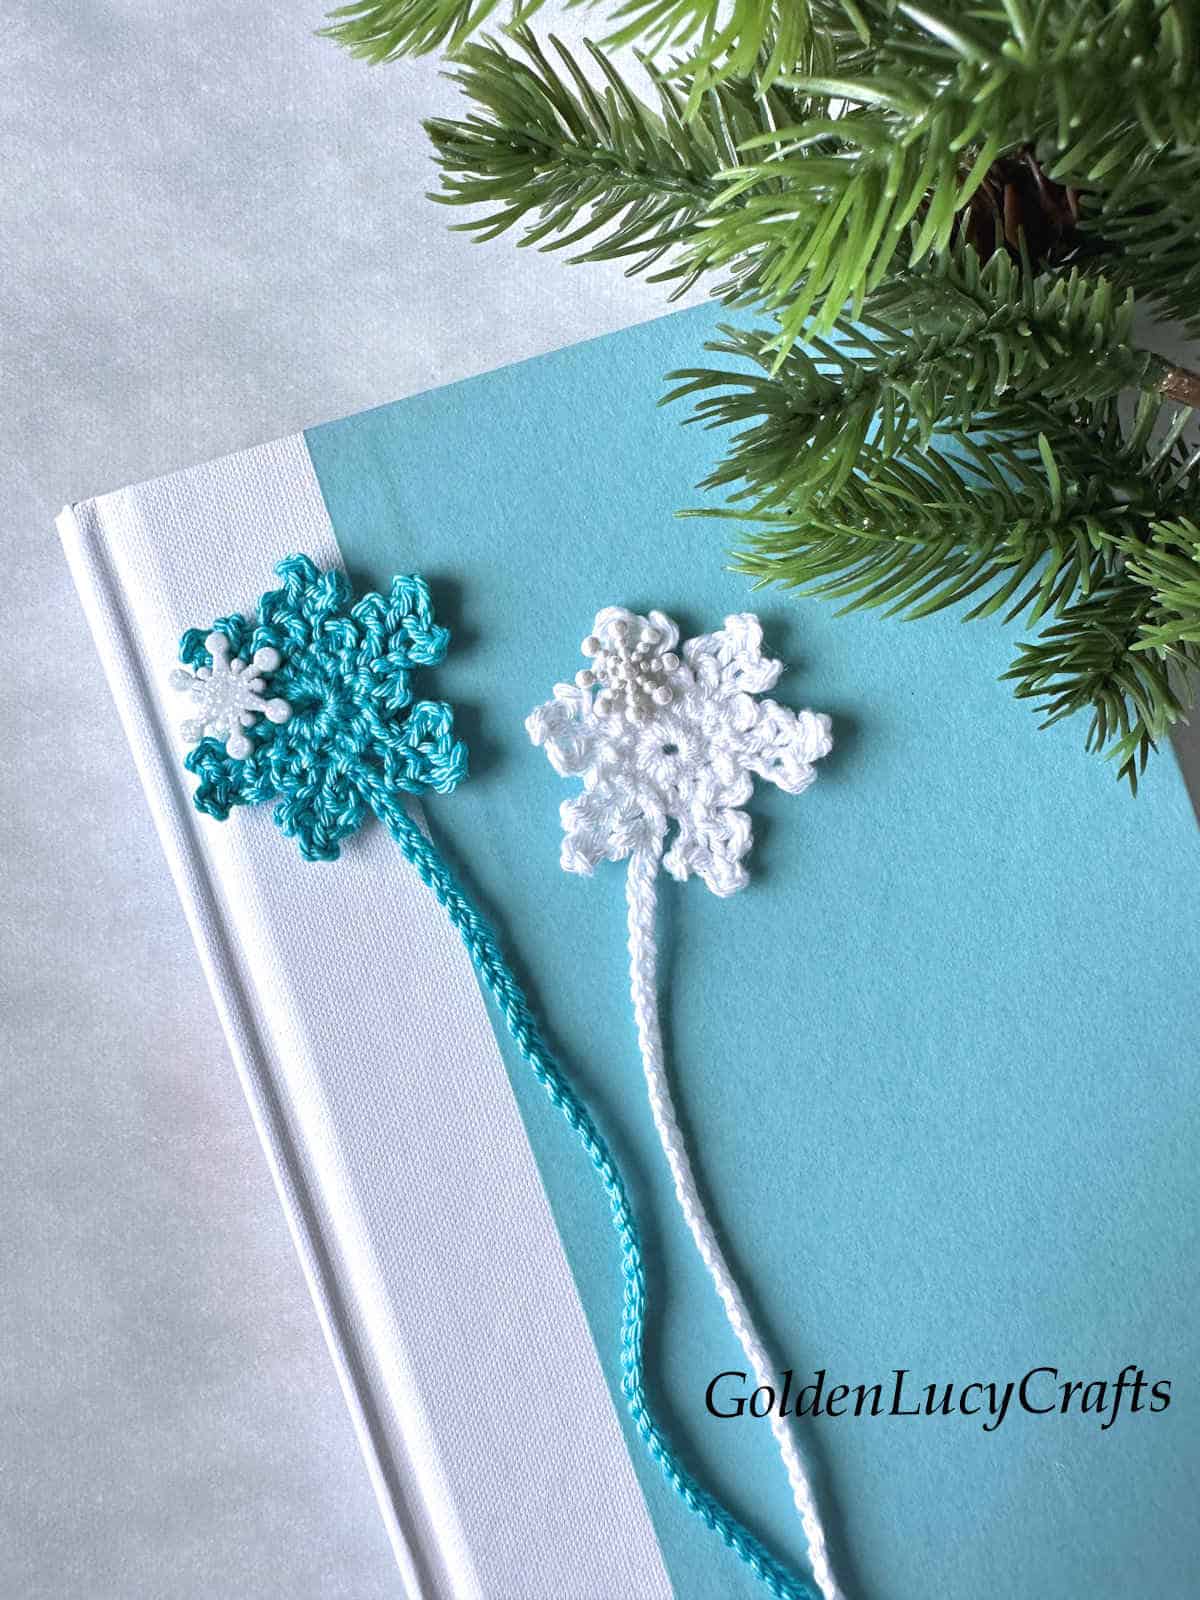 Two crochet snowflake bookmarks on the top of the book close up picture.